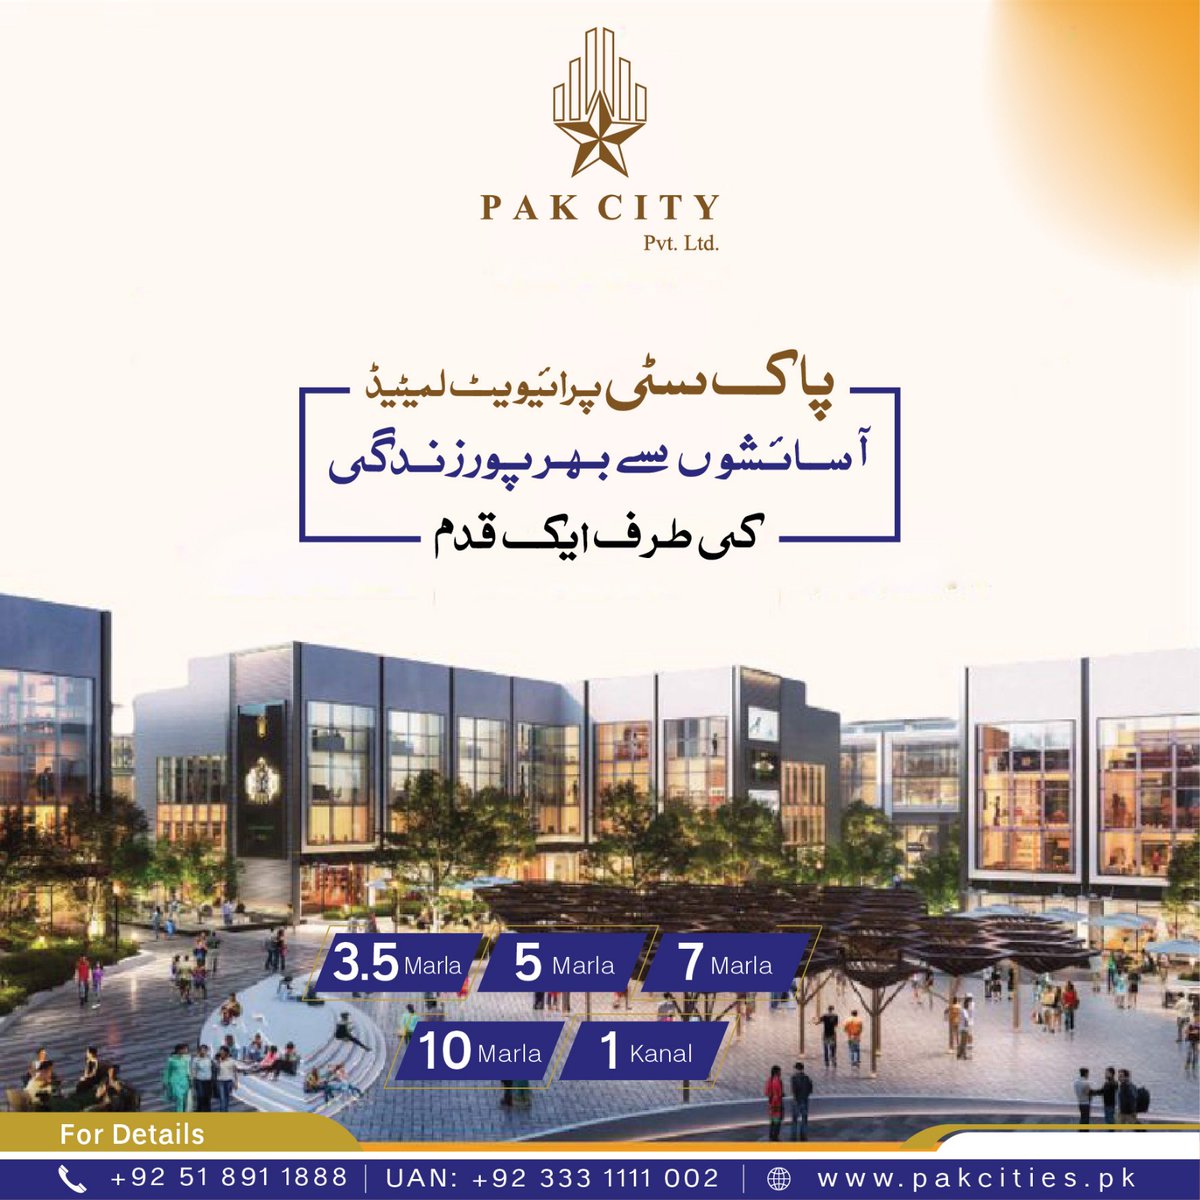 'Discover your perfect plot in Pak City! 

For Booking Please Contact:
Join Pak City Pvt Ltd
UAN: 0333 1111 002
0332 8999998
051 8911998

#pakcity #pakcitypvtltd #newhousingsociety #5marla #residentialplot #islamabadproperty #propertyinrawalpindi #realestate #easyinstallments